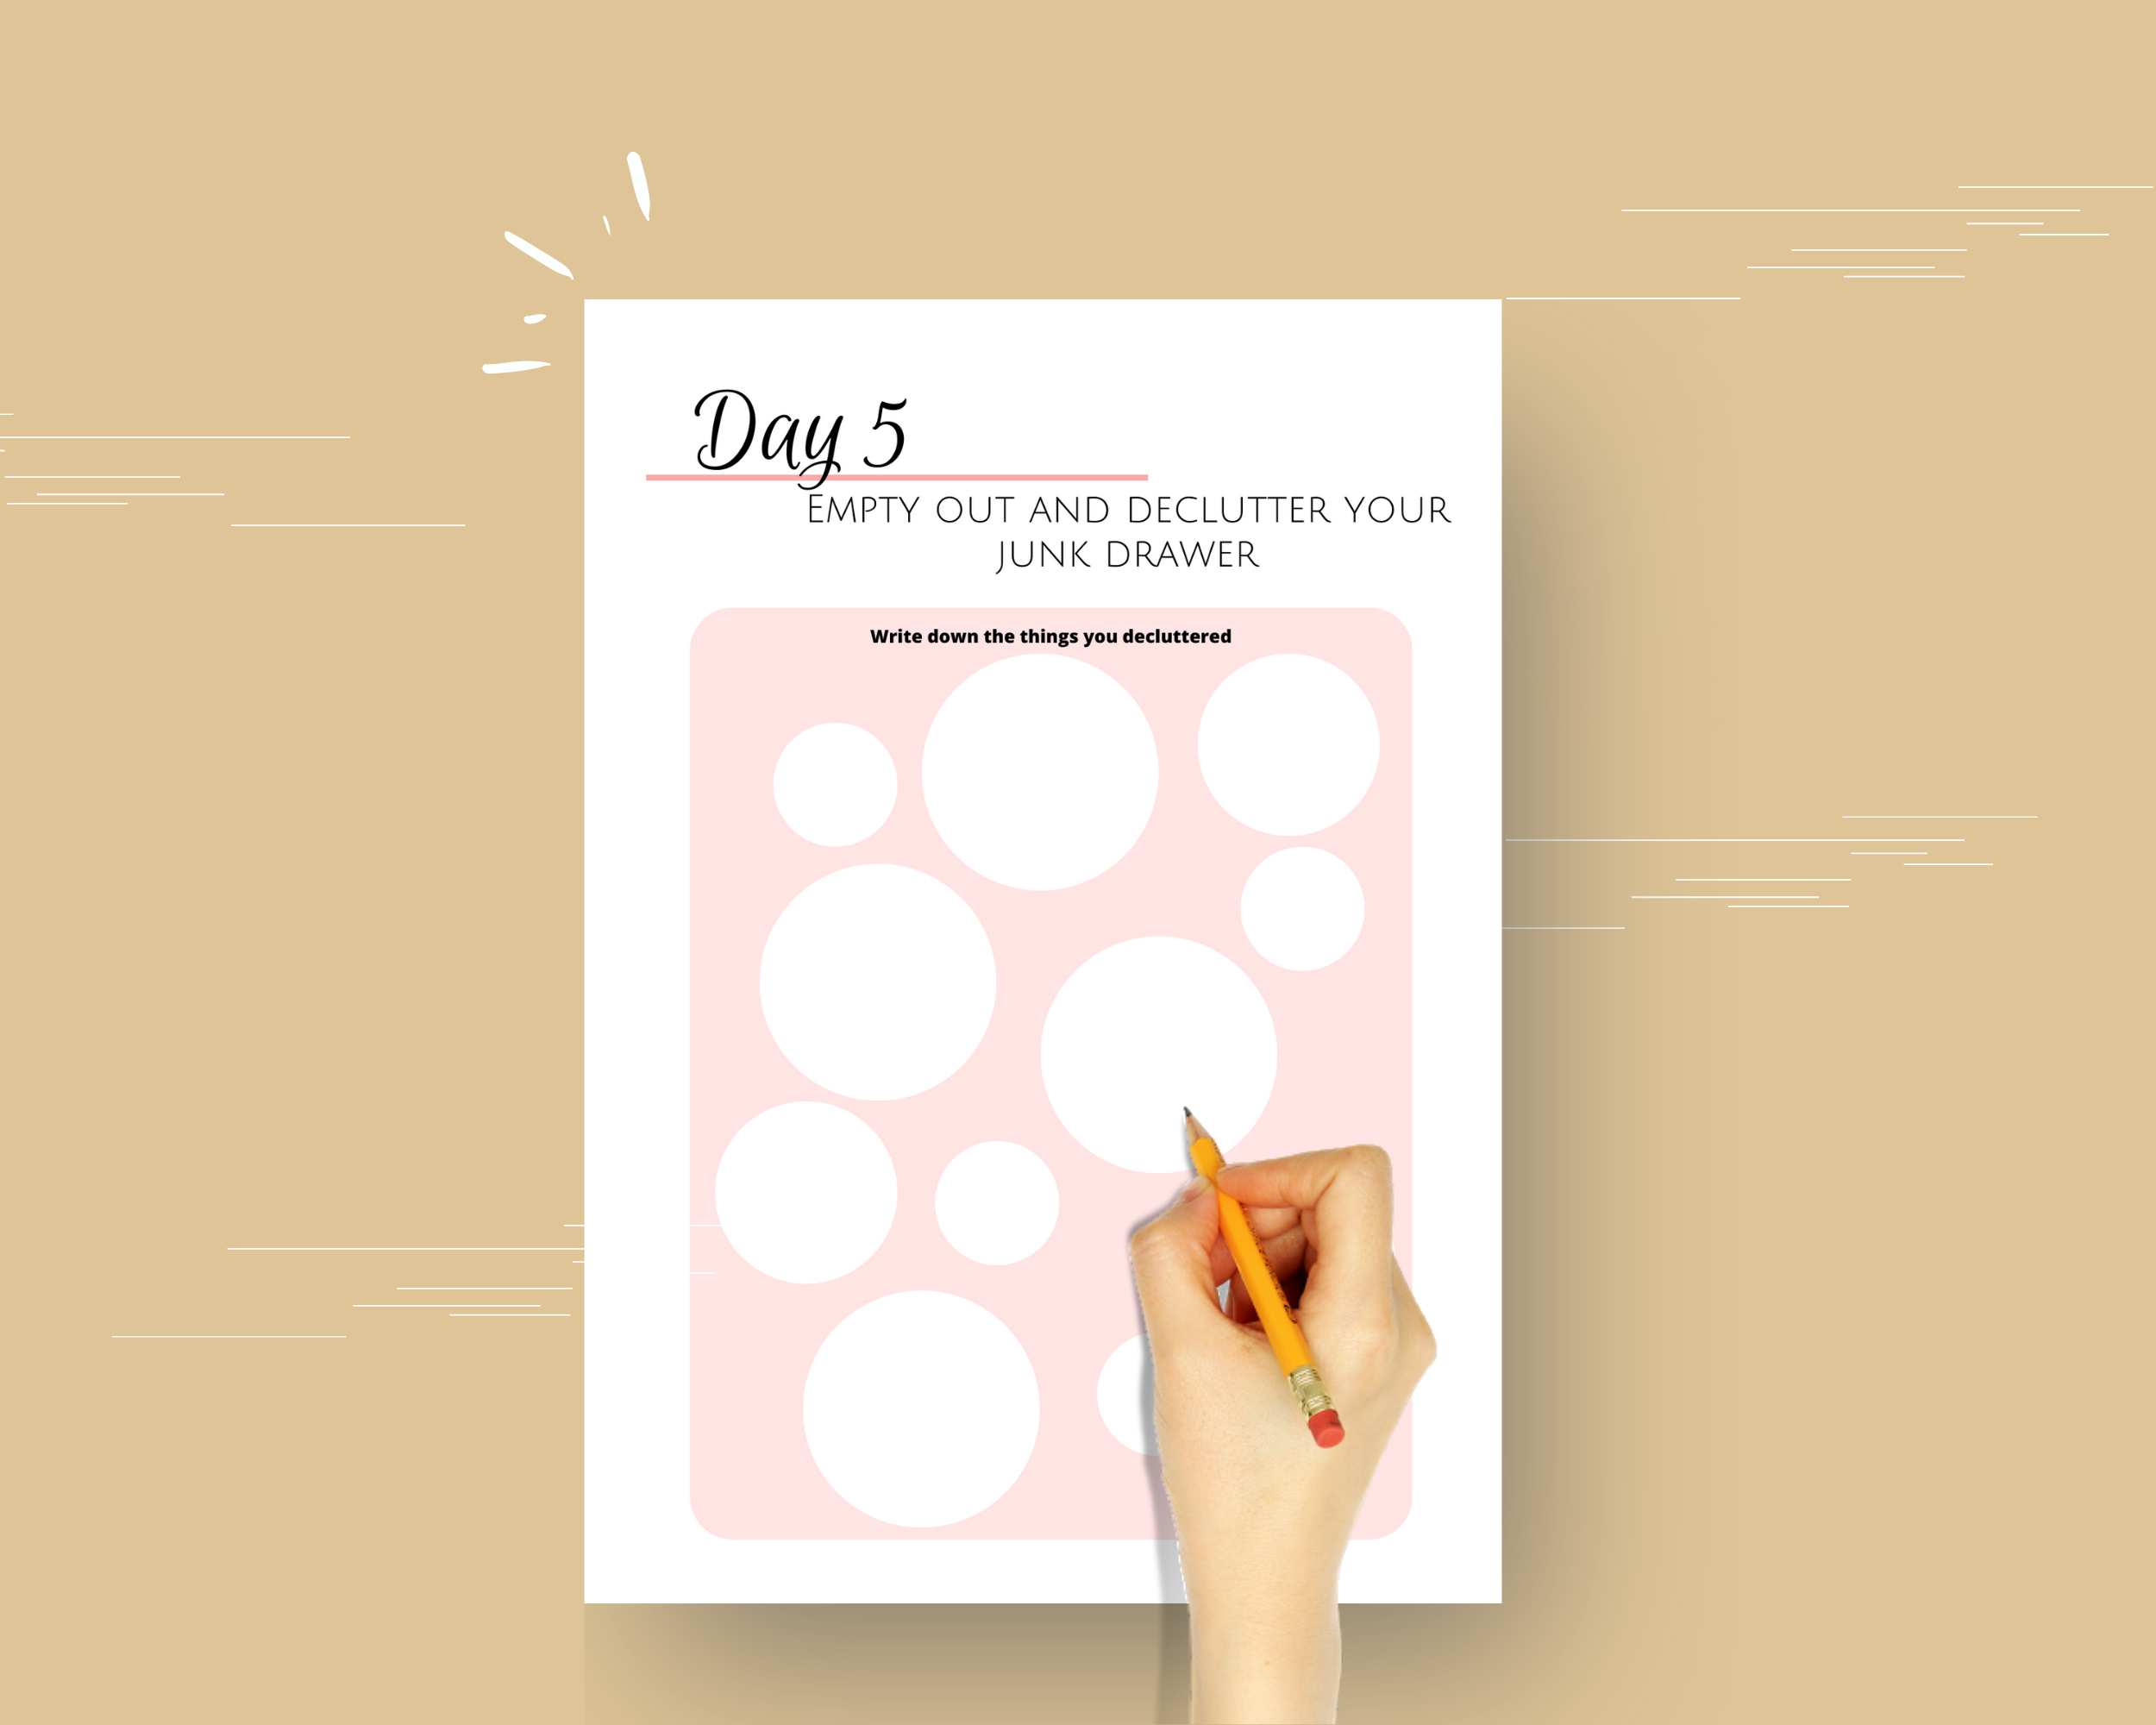 14-Day Minimalism Challenge | Editable Canva Template A4 Size